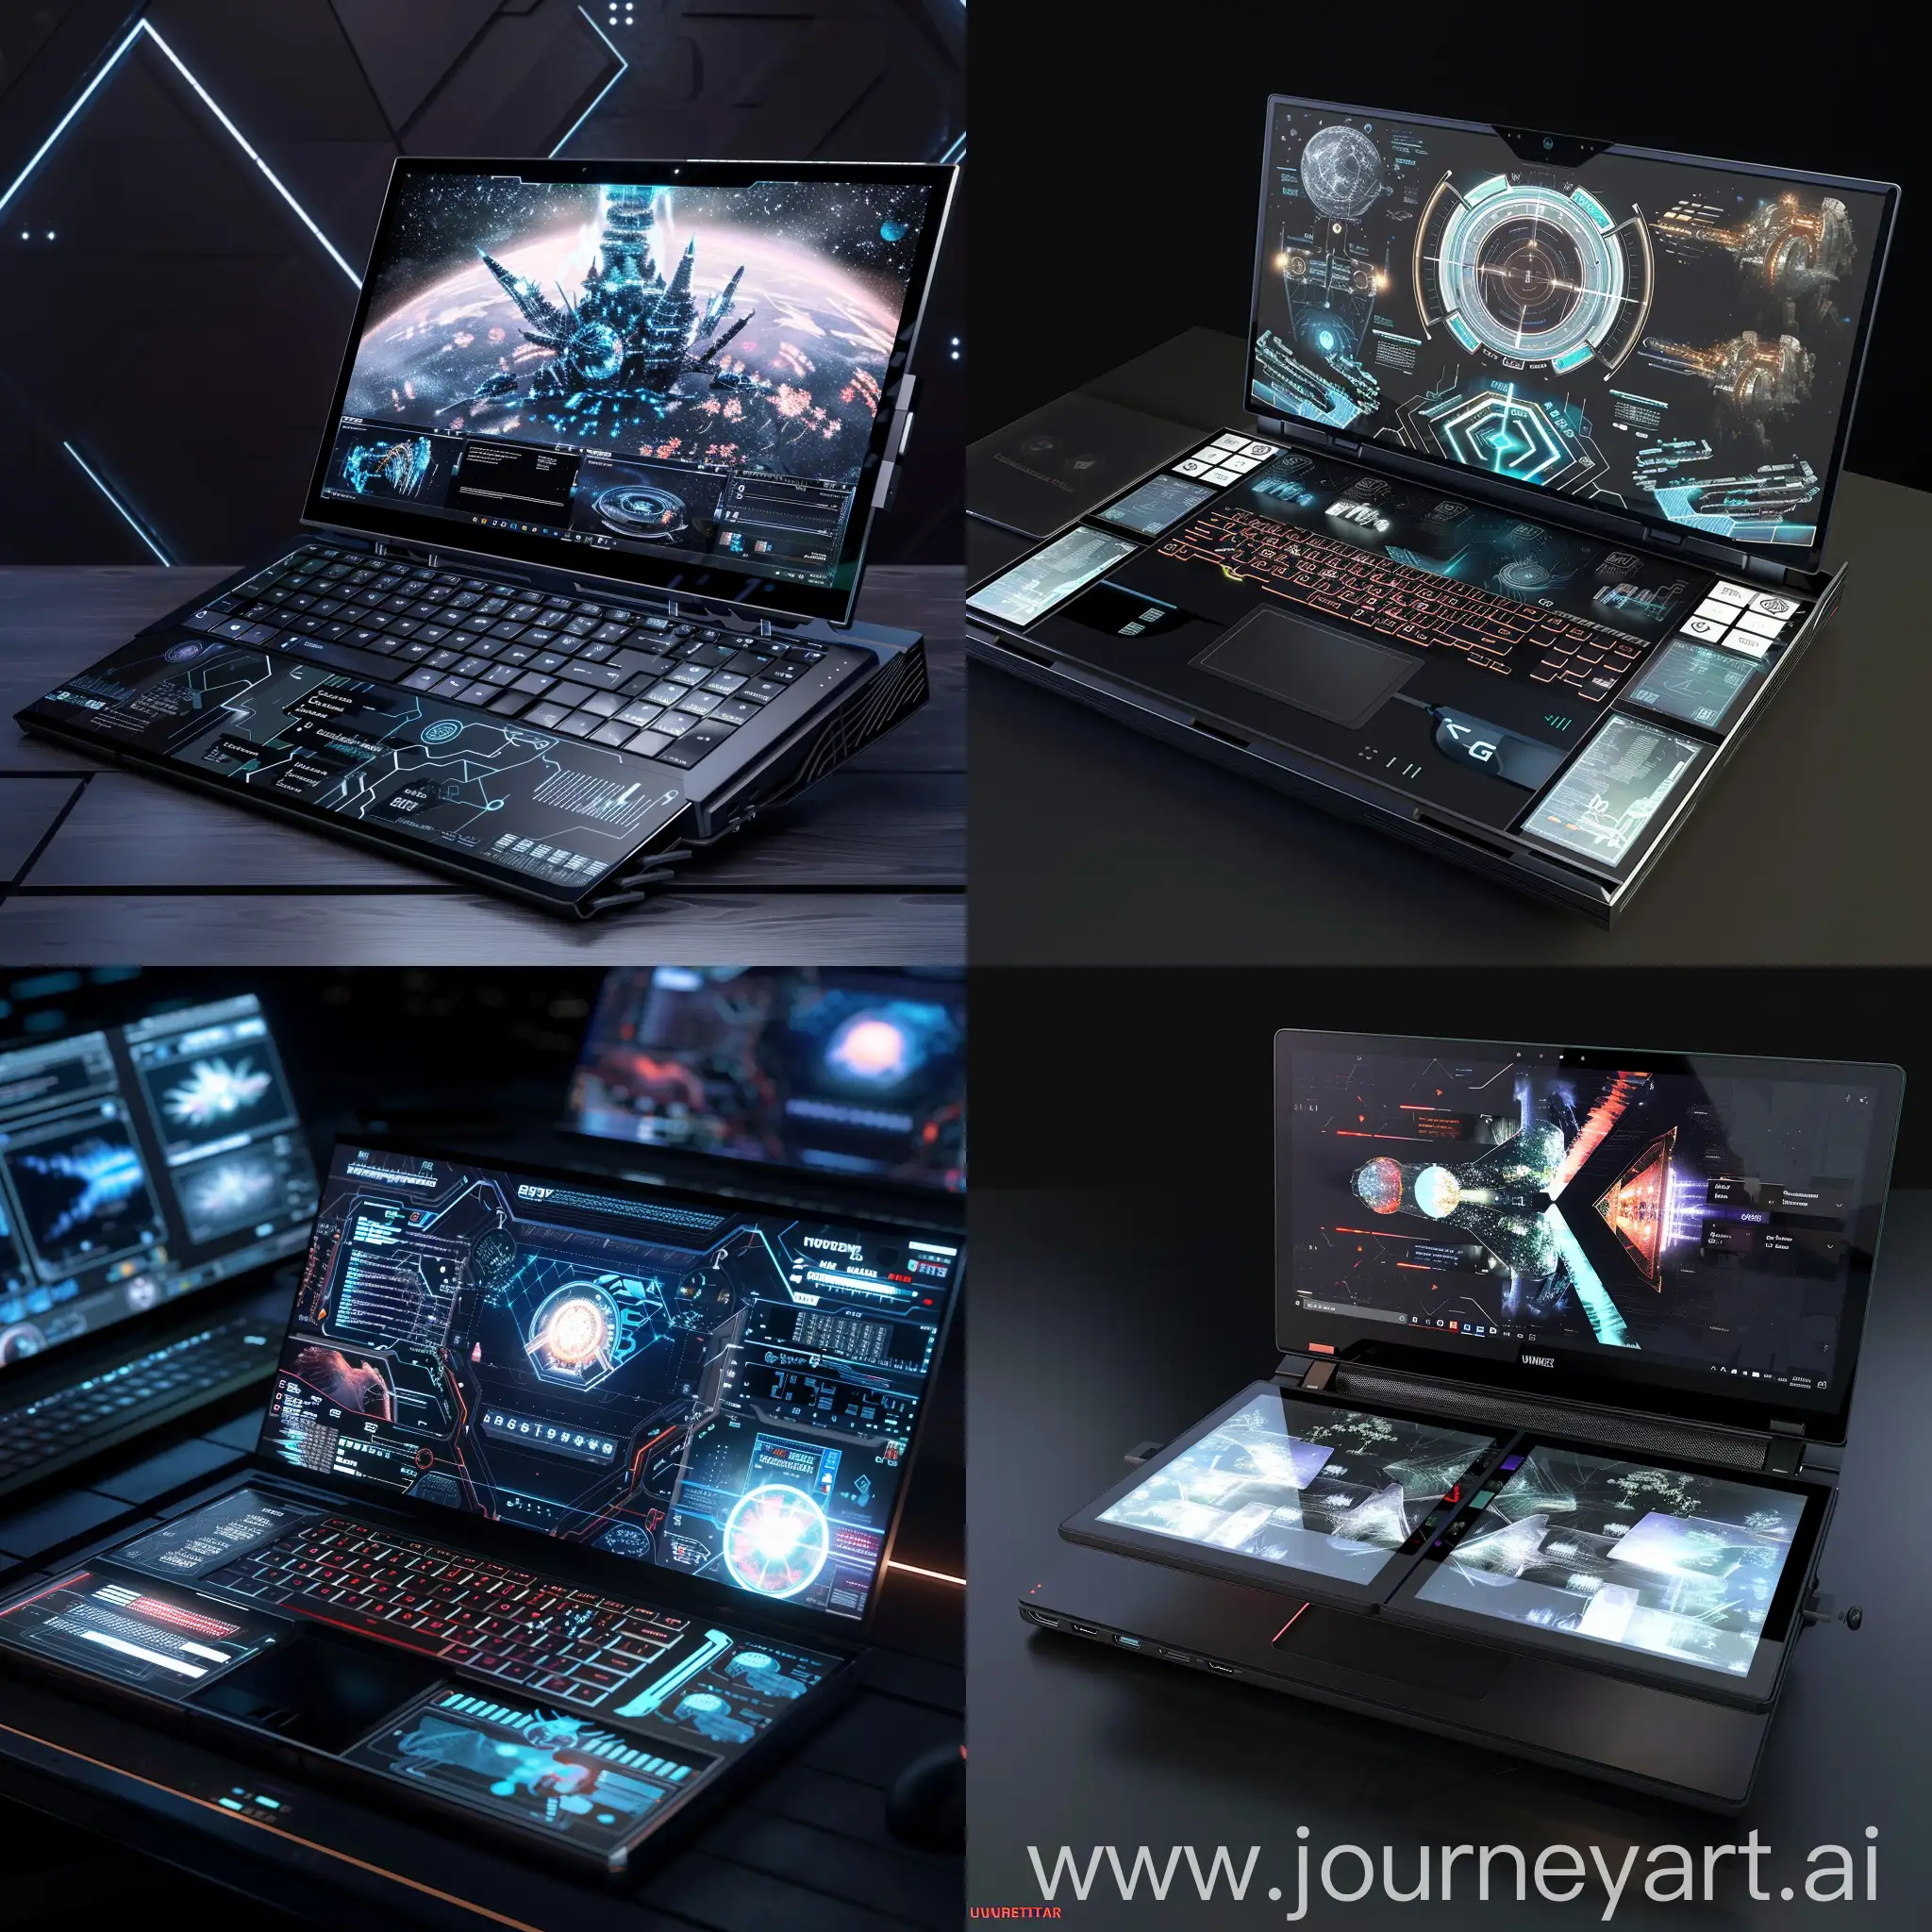 Futuristic-DualScreen-Laptop-with-AIEnhanced-Features